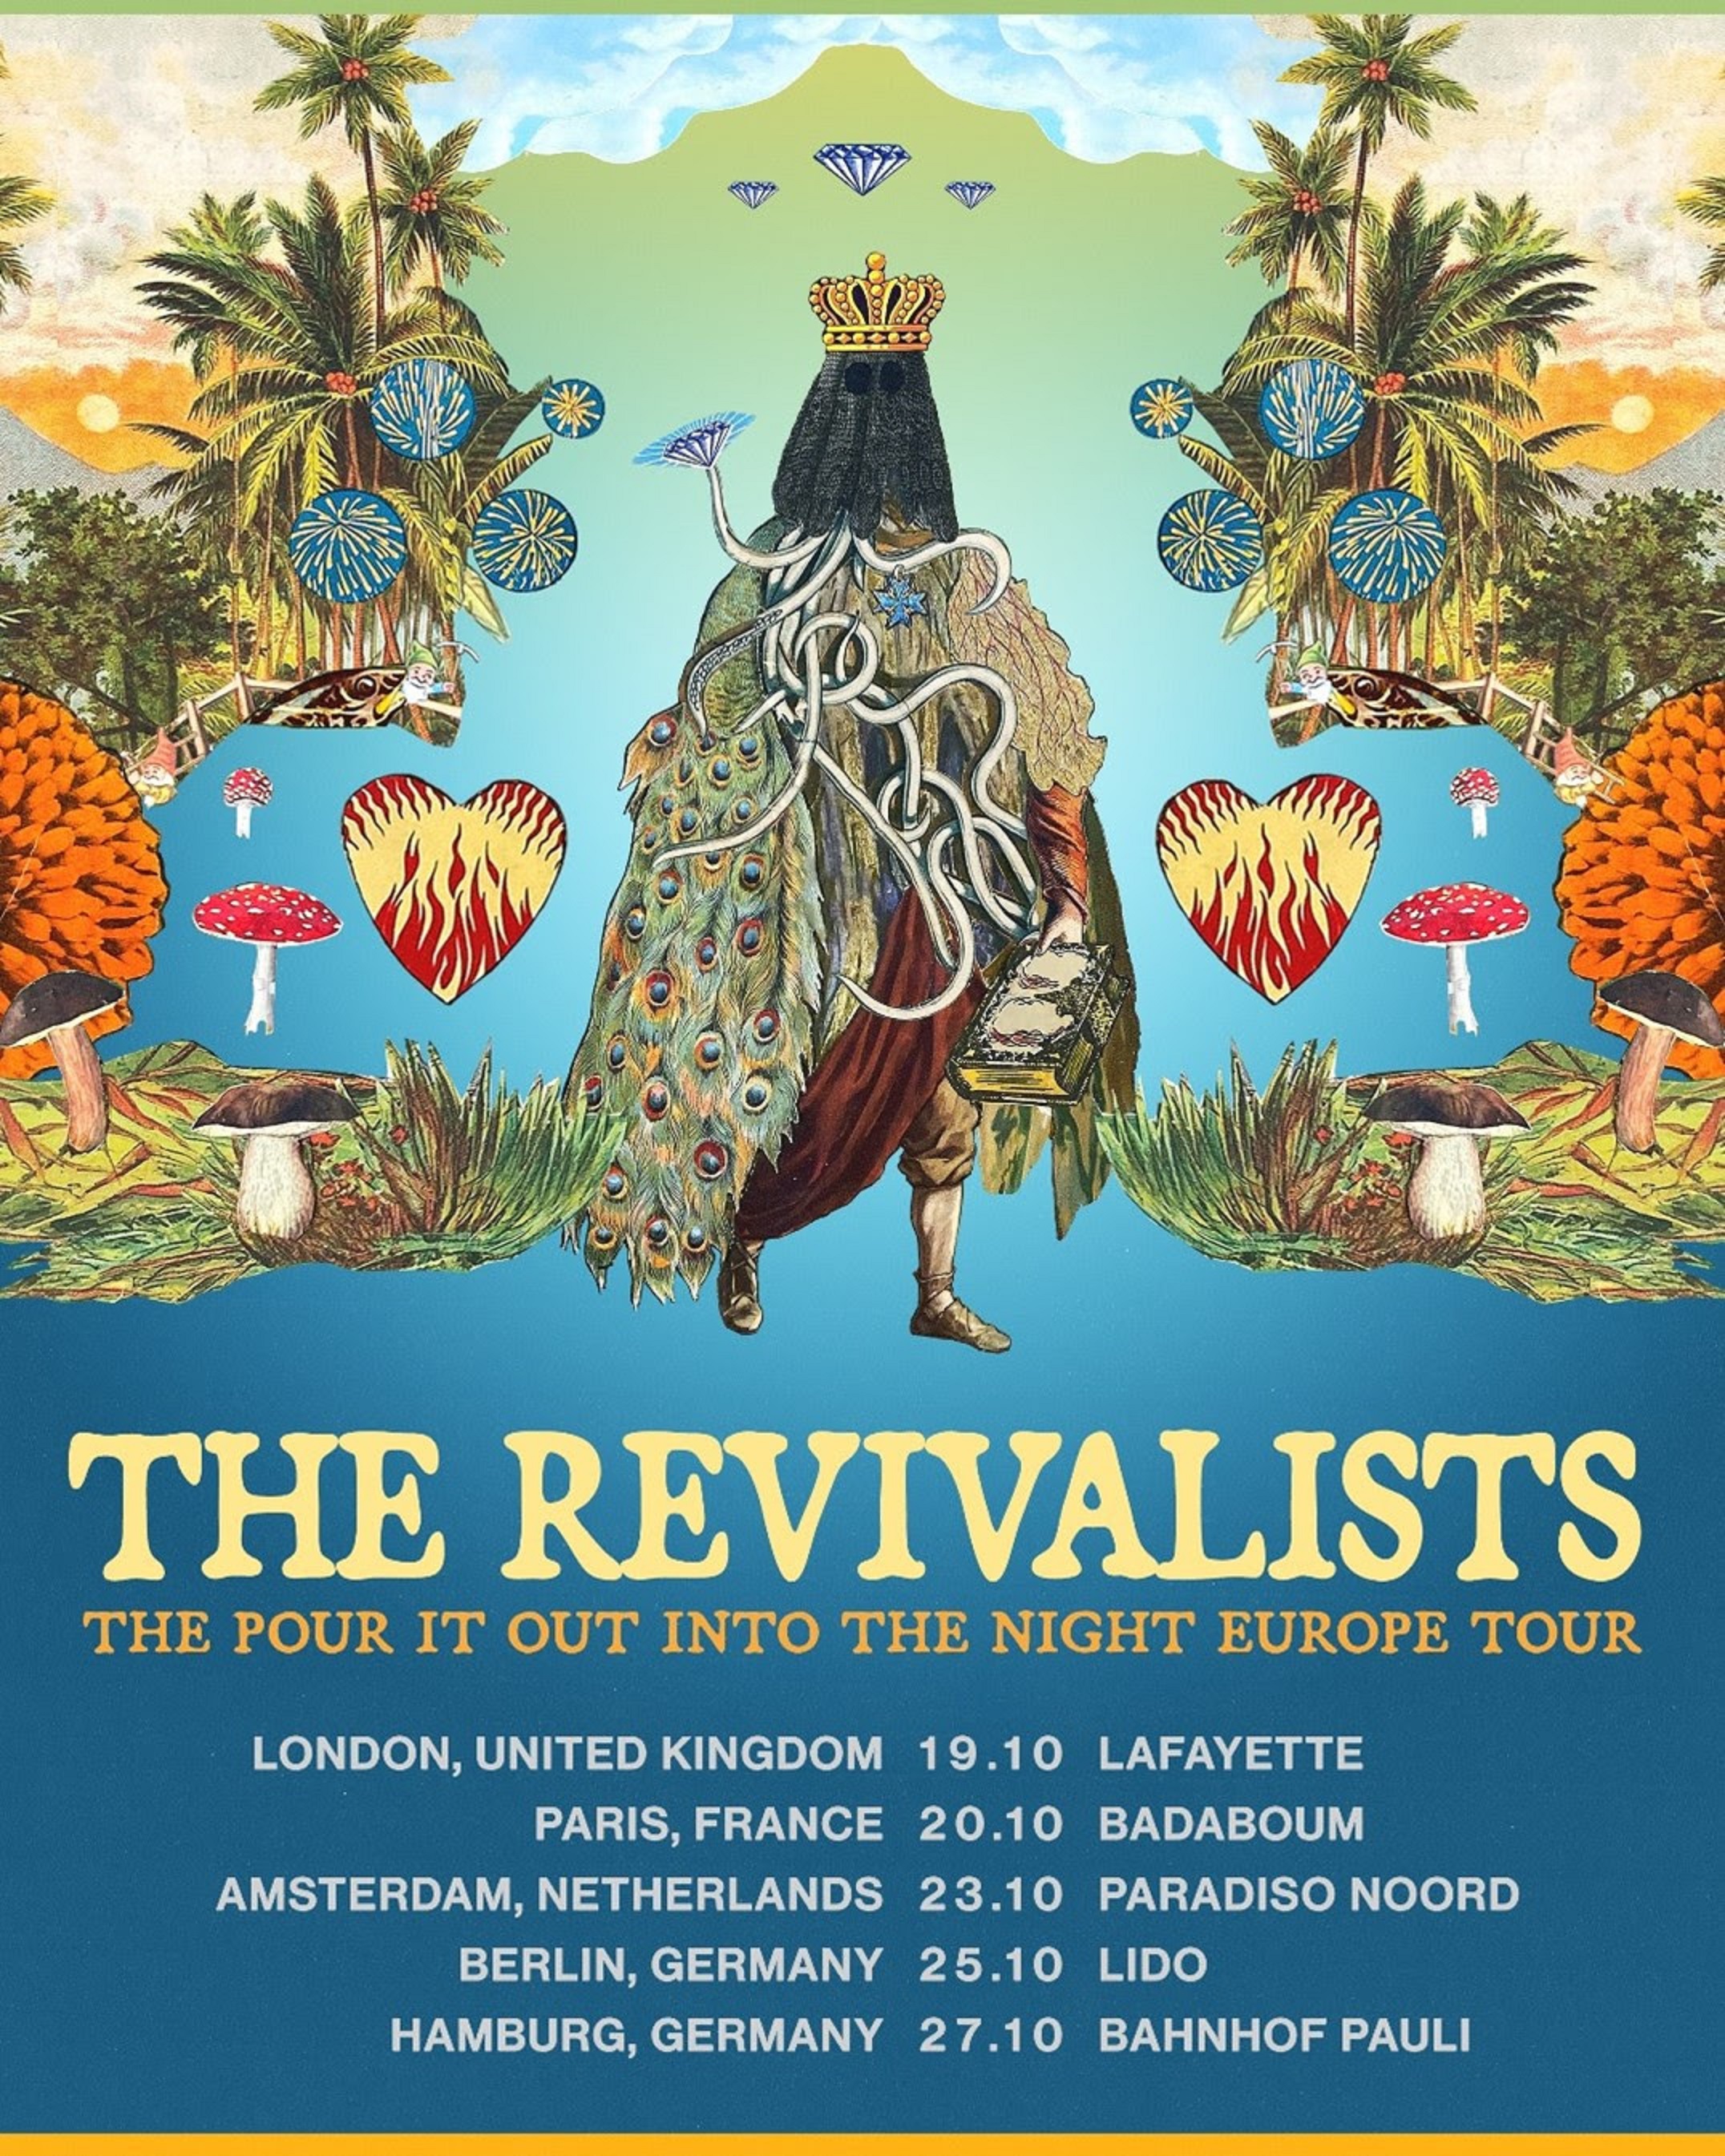 The Revivalists Release Music Video for New Radio Single “Good Old Days”